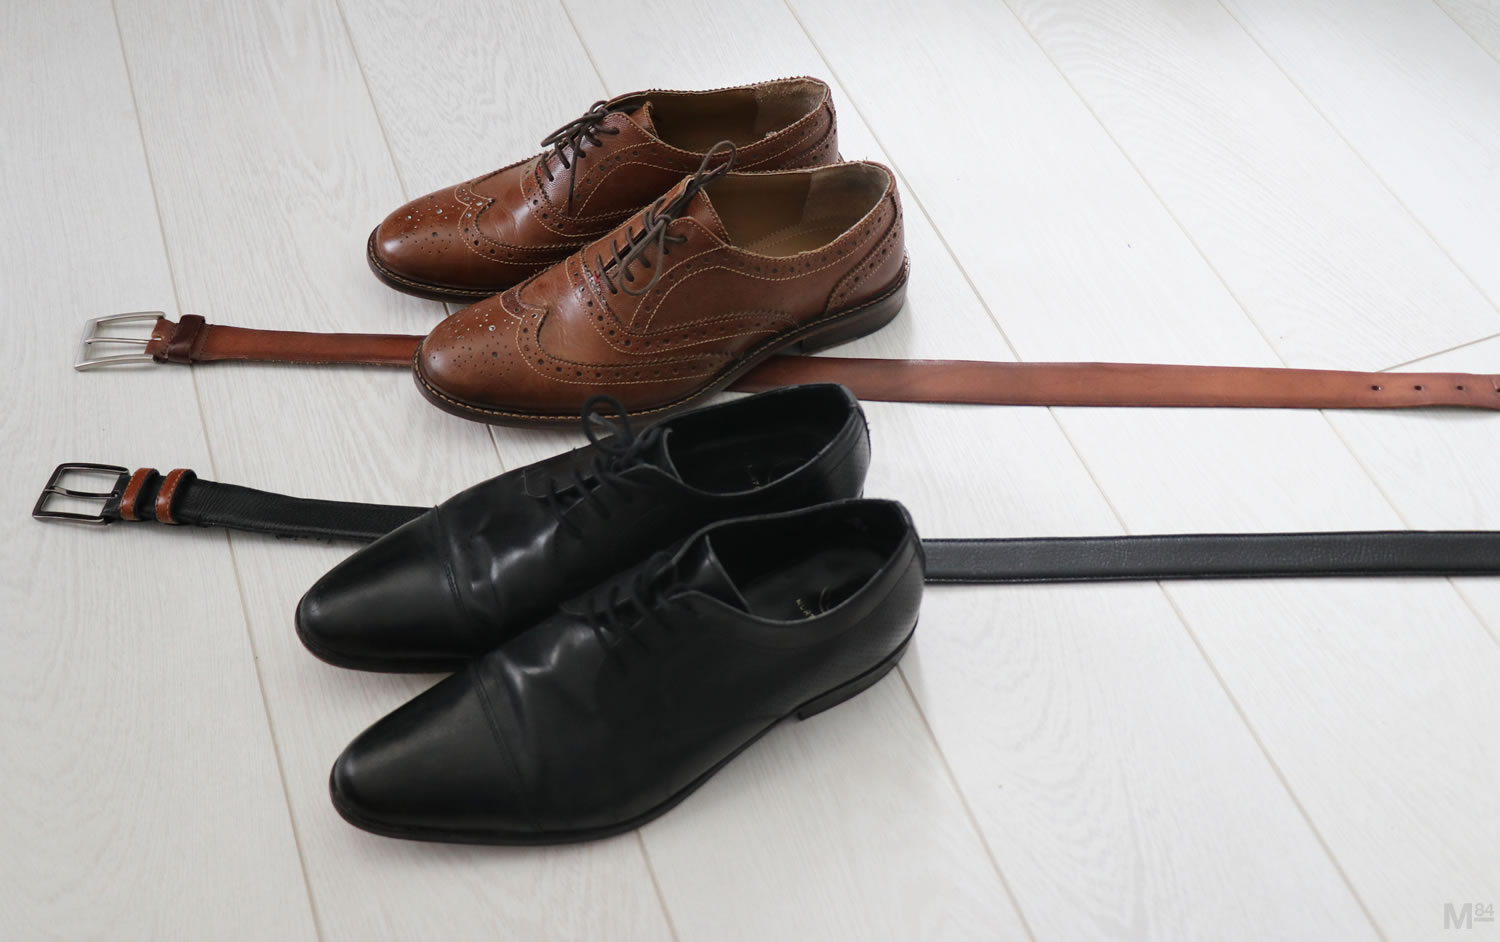 Everything You Need To Know About Matching Your Belts and Shoes